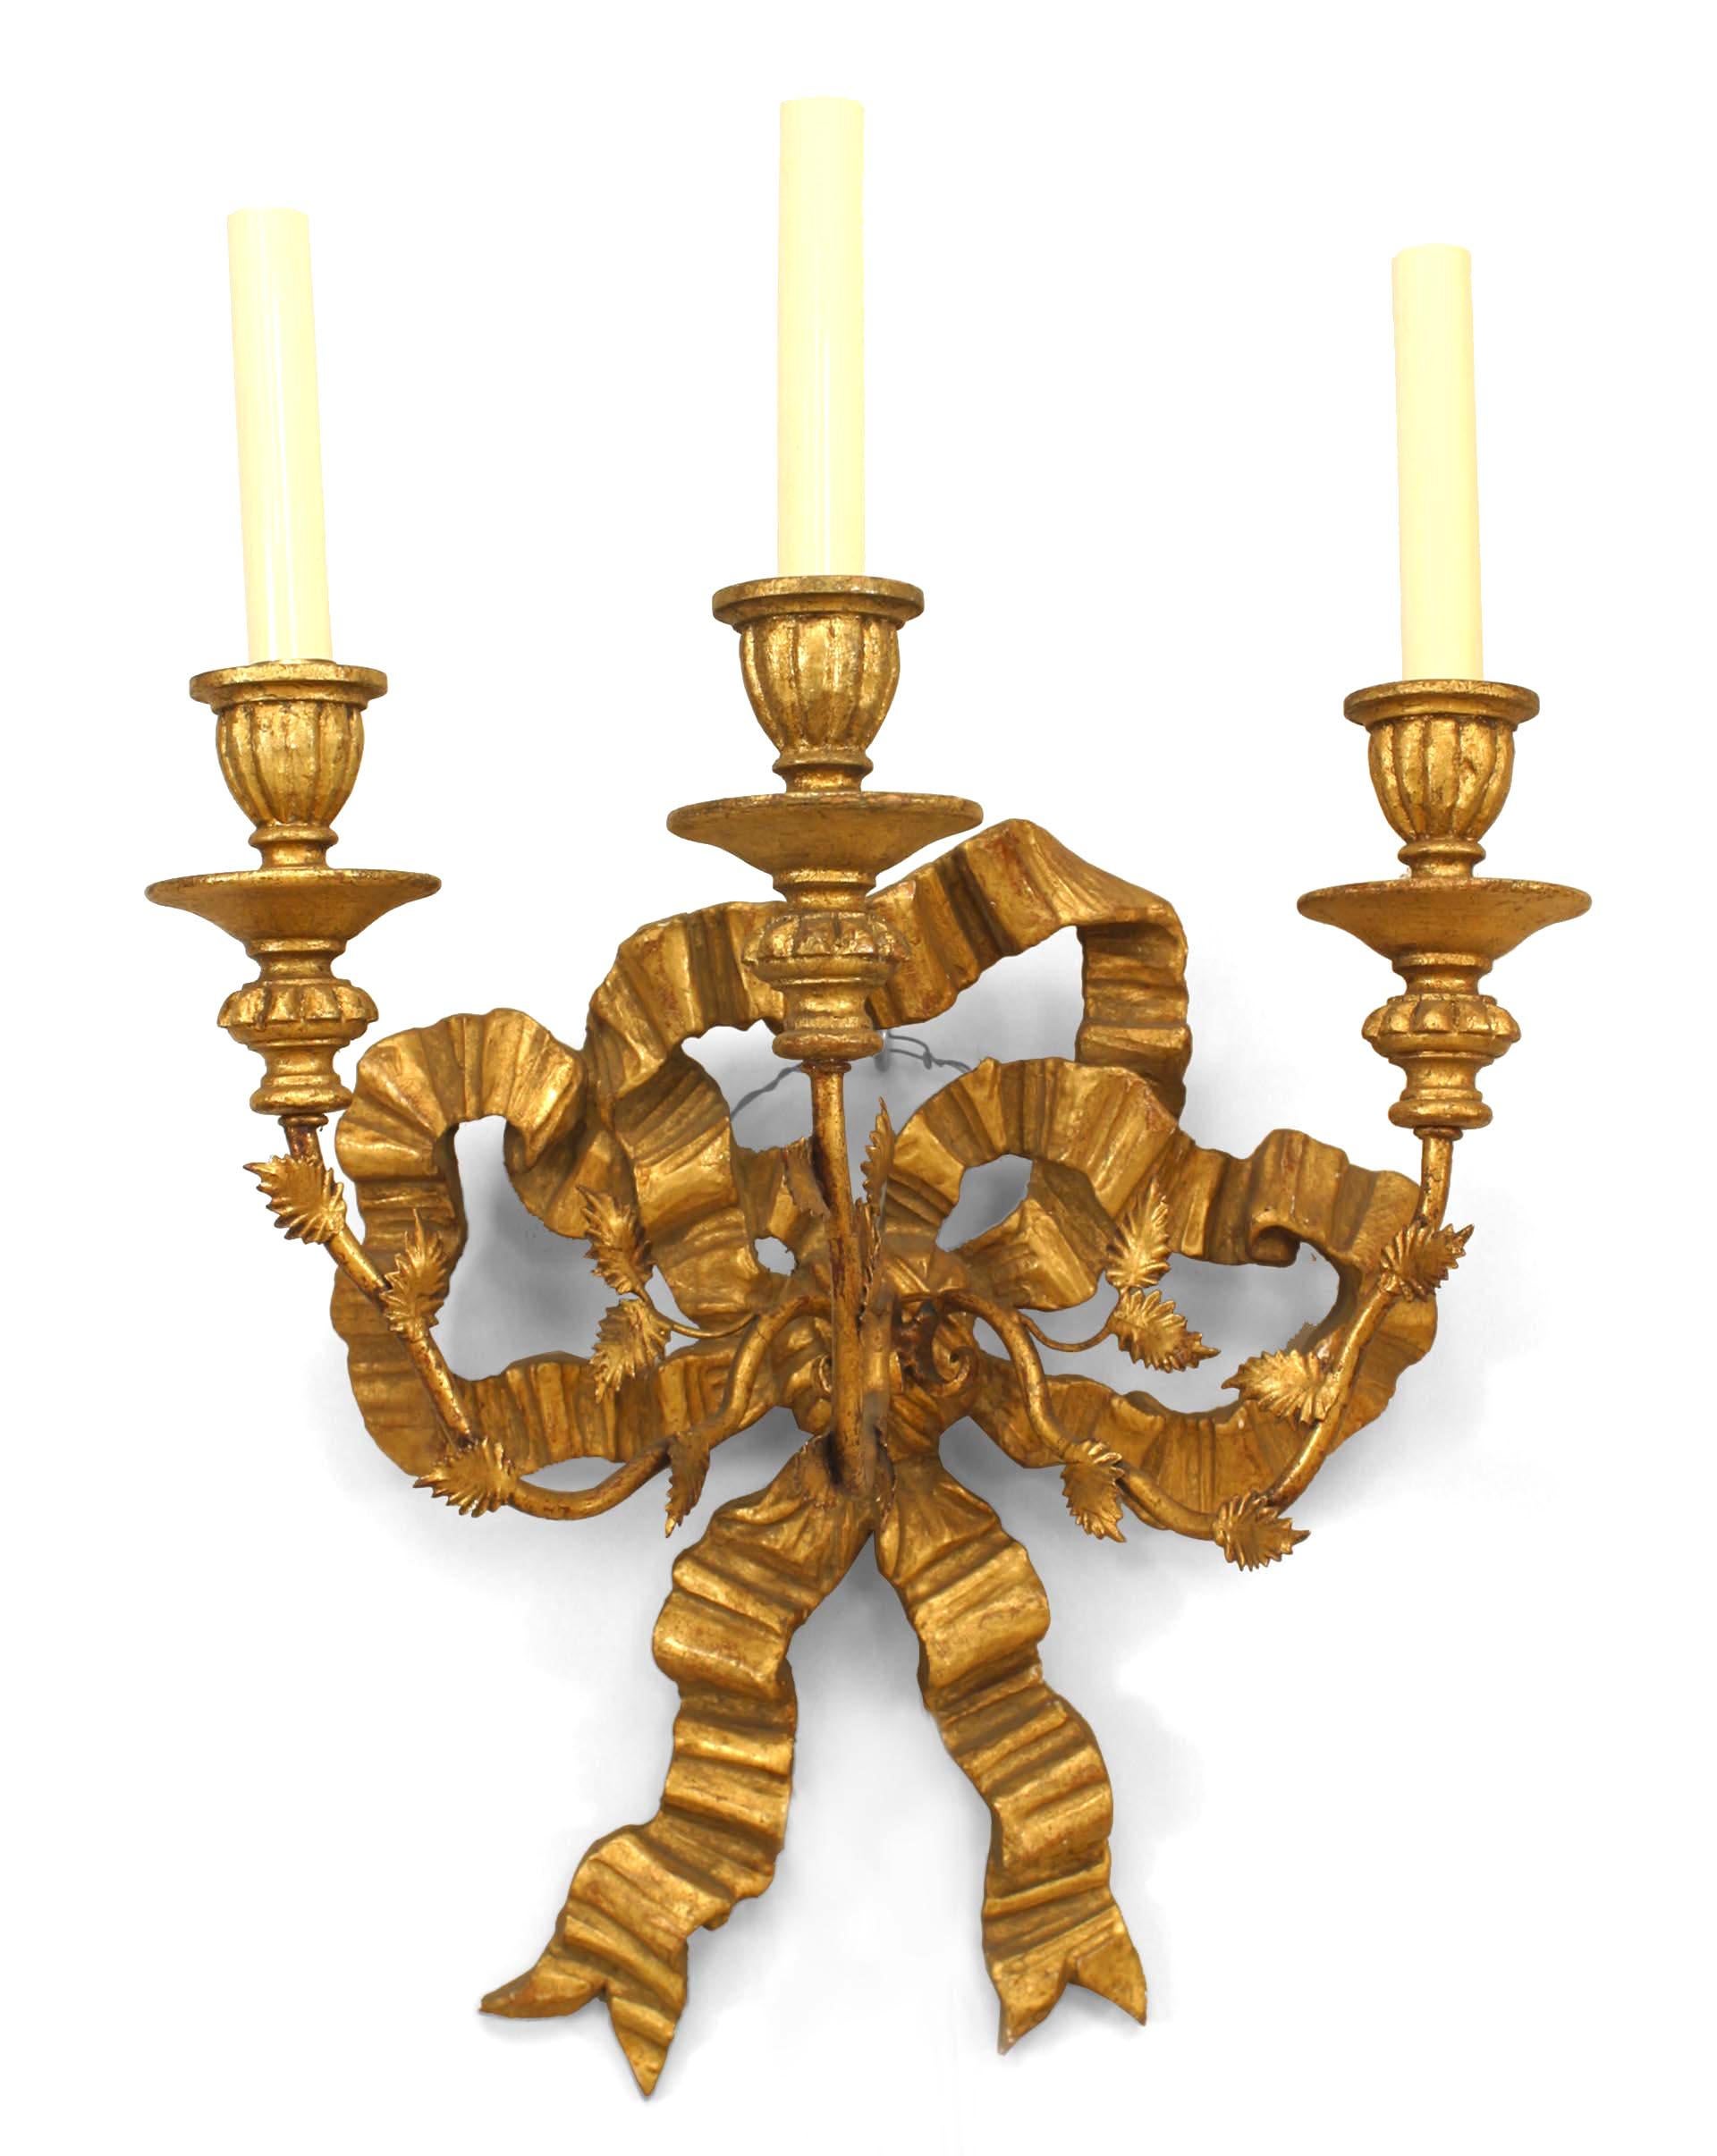 Pair of French Louis XV style gilt (19th-20th century) wood bow knot back wall sconces with 3 gilt metal arms.